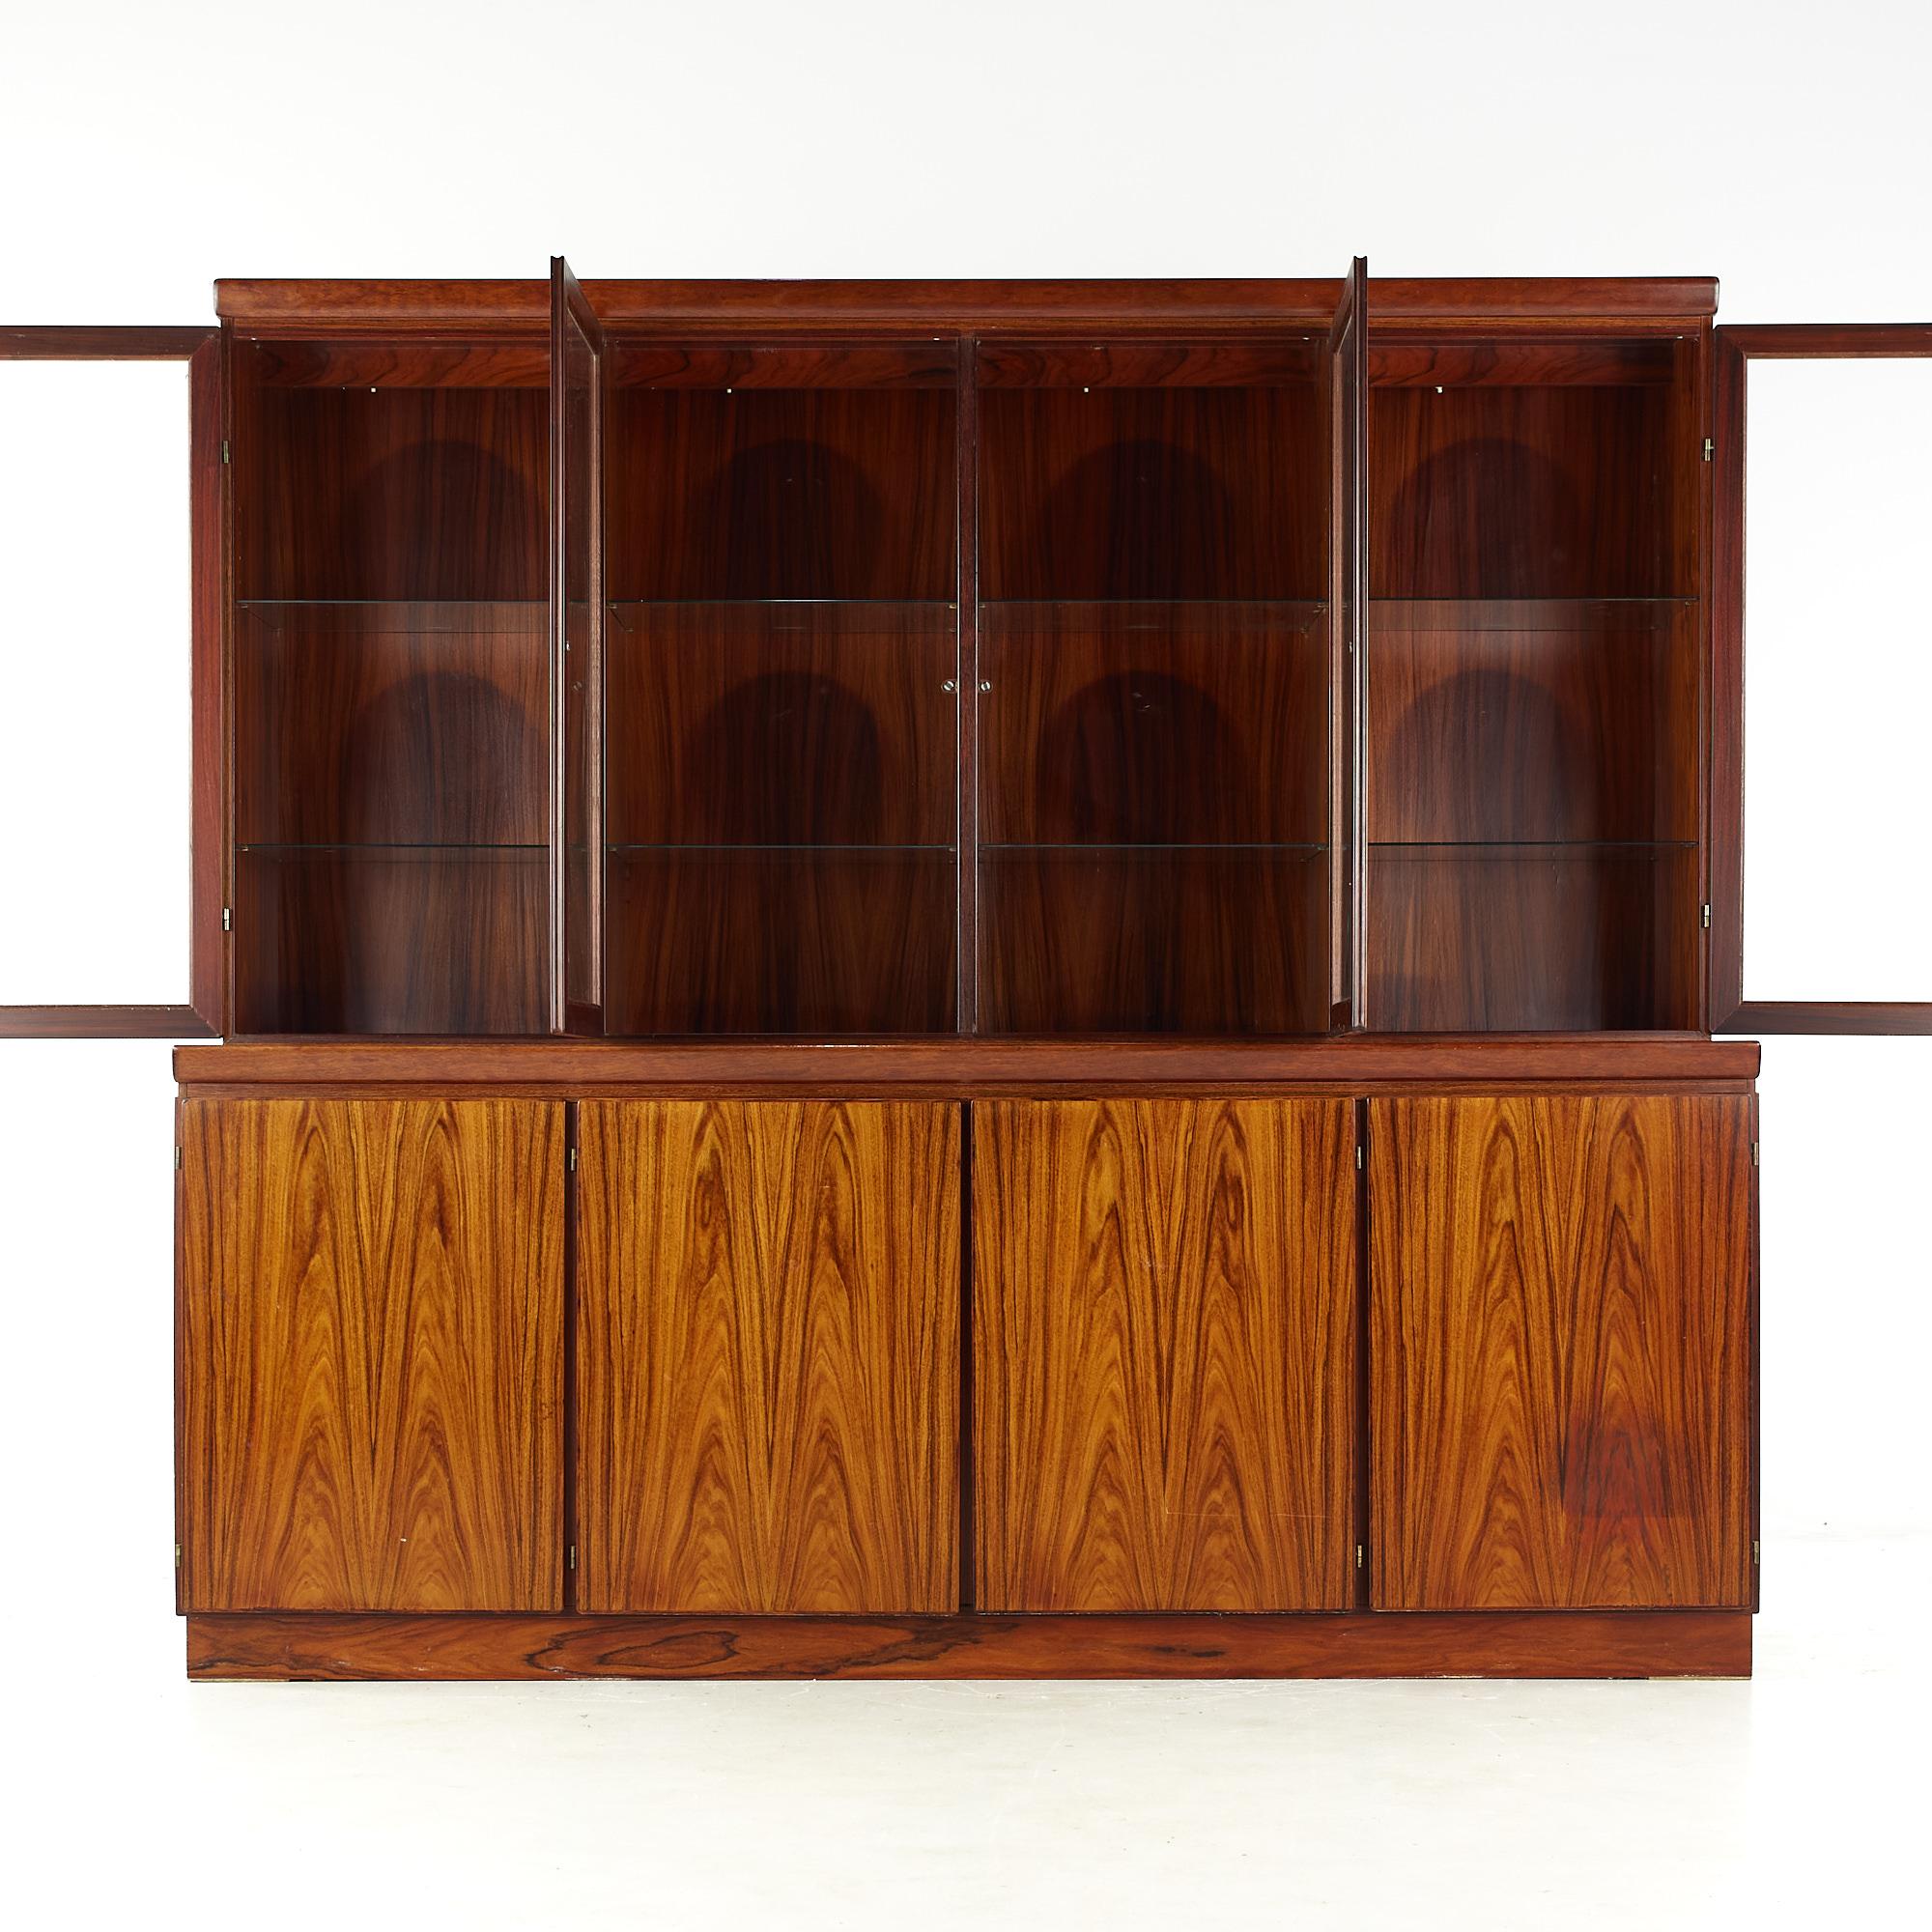 Skovby mid-century Danish rosewood buffet and hutch

The buffet measures: 80.5 wide x 19 deep x 32.5 inches high
The hutch measures: 77.5 wide x 15 deep x 39.5 inches high
The combined height of the buffet and hutch is 72 inches

All pieces of